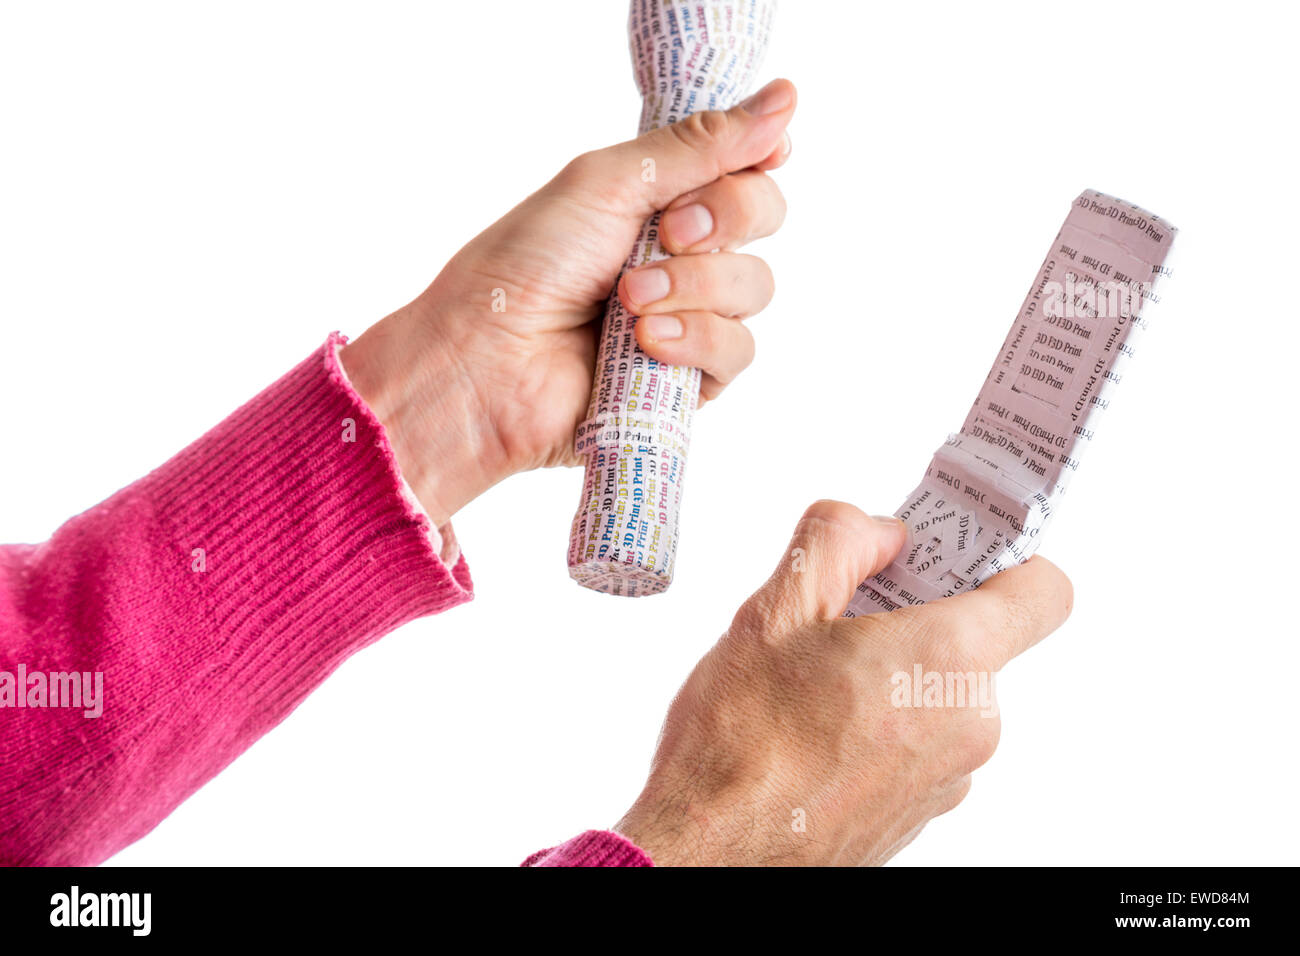 Adult hands in red sweater holding 3D Print labelled prototypes of white flashlight and clam shell mobile phone Stock Photo